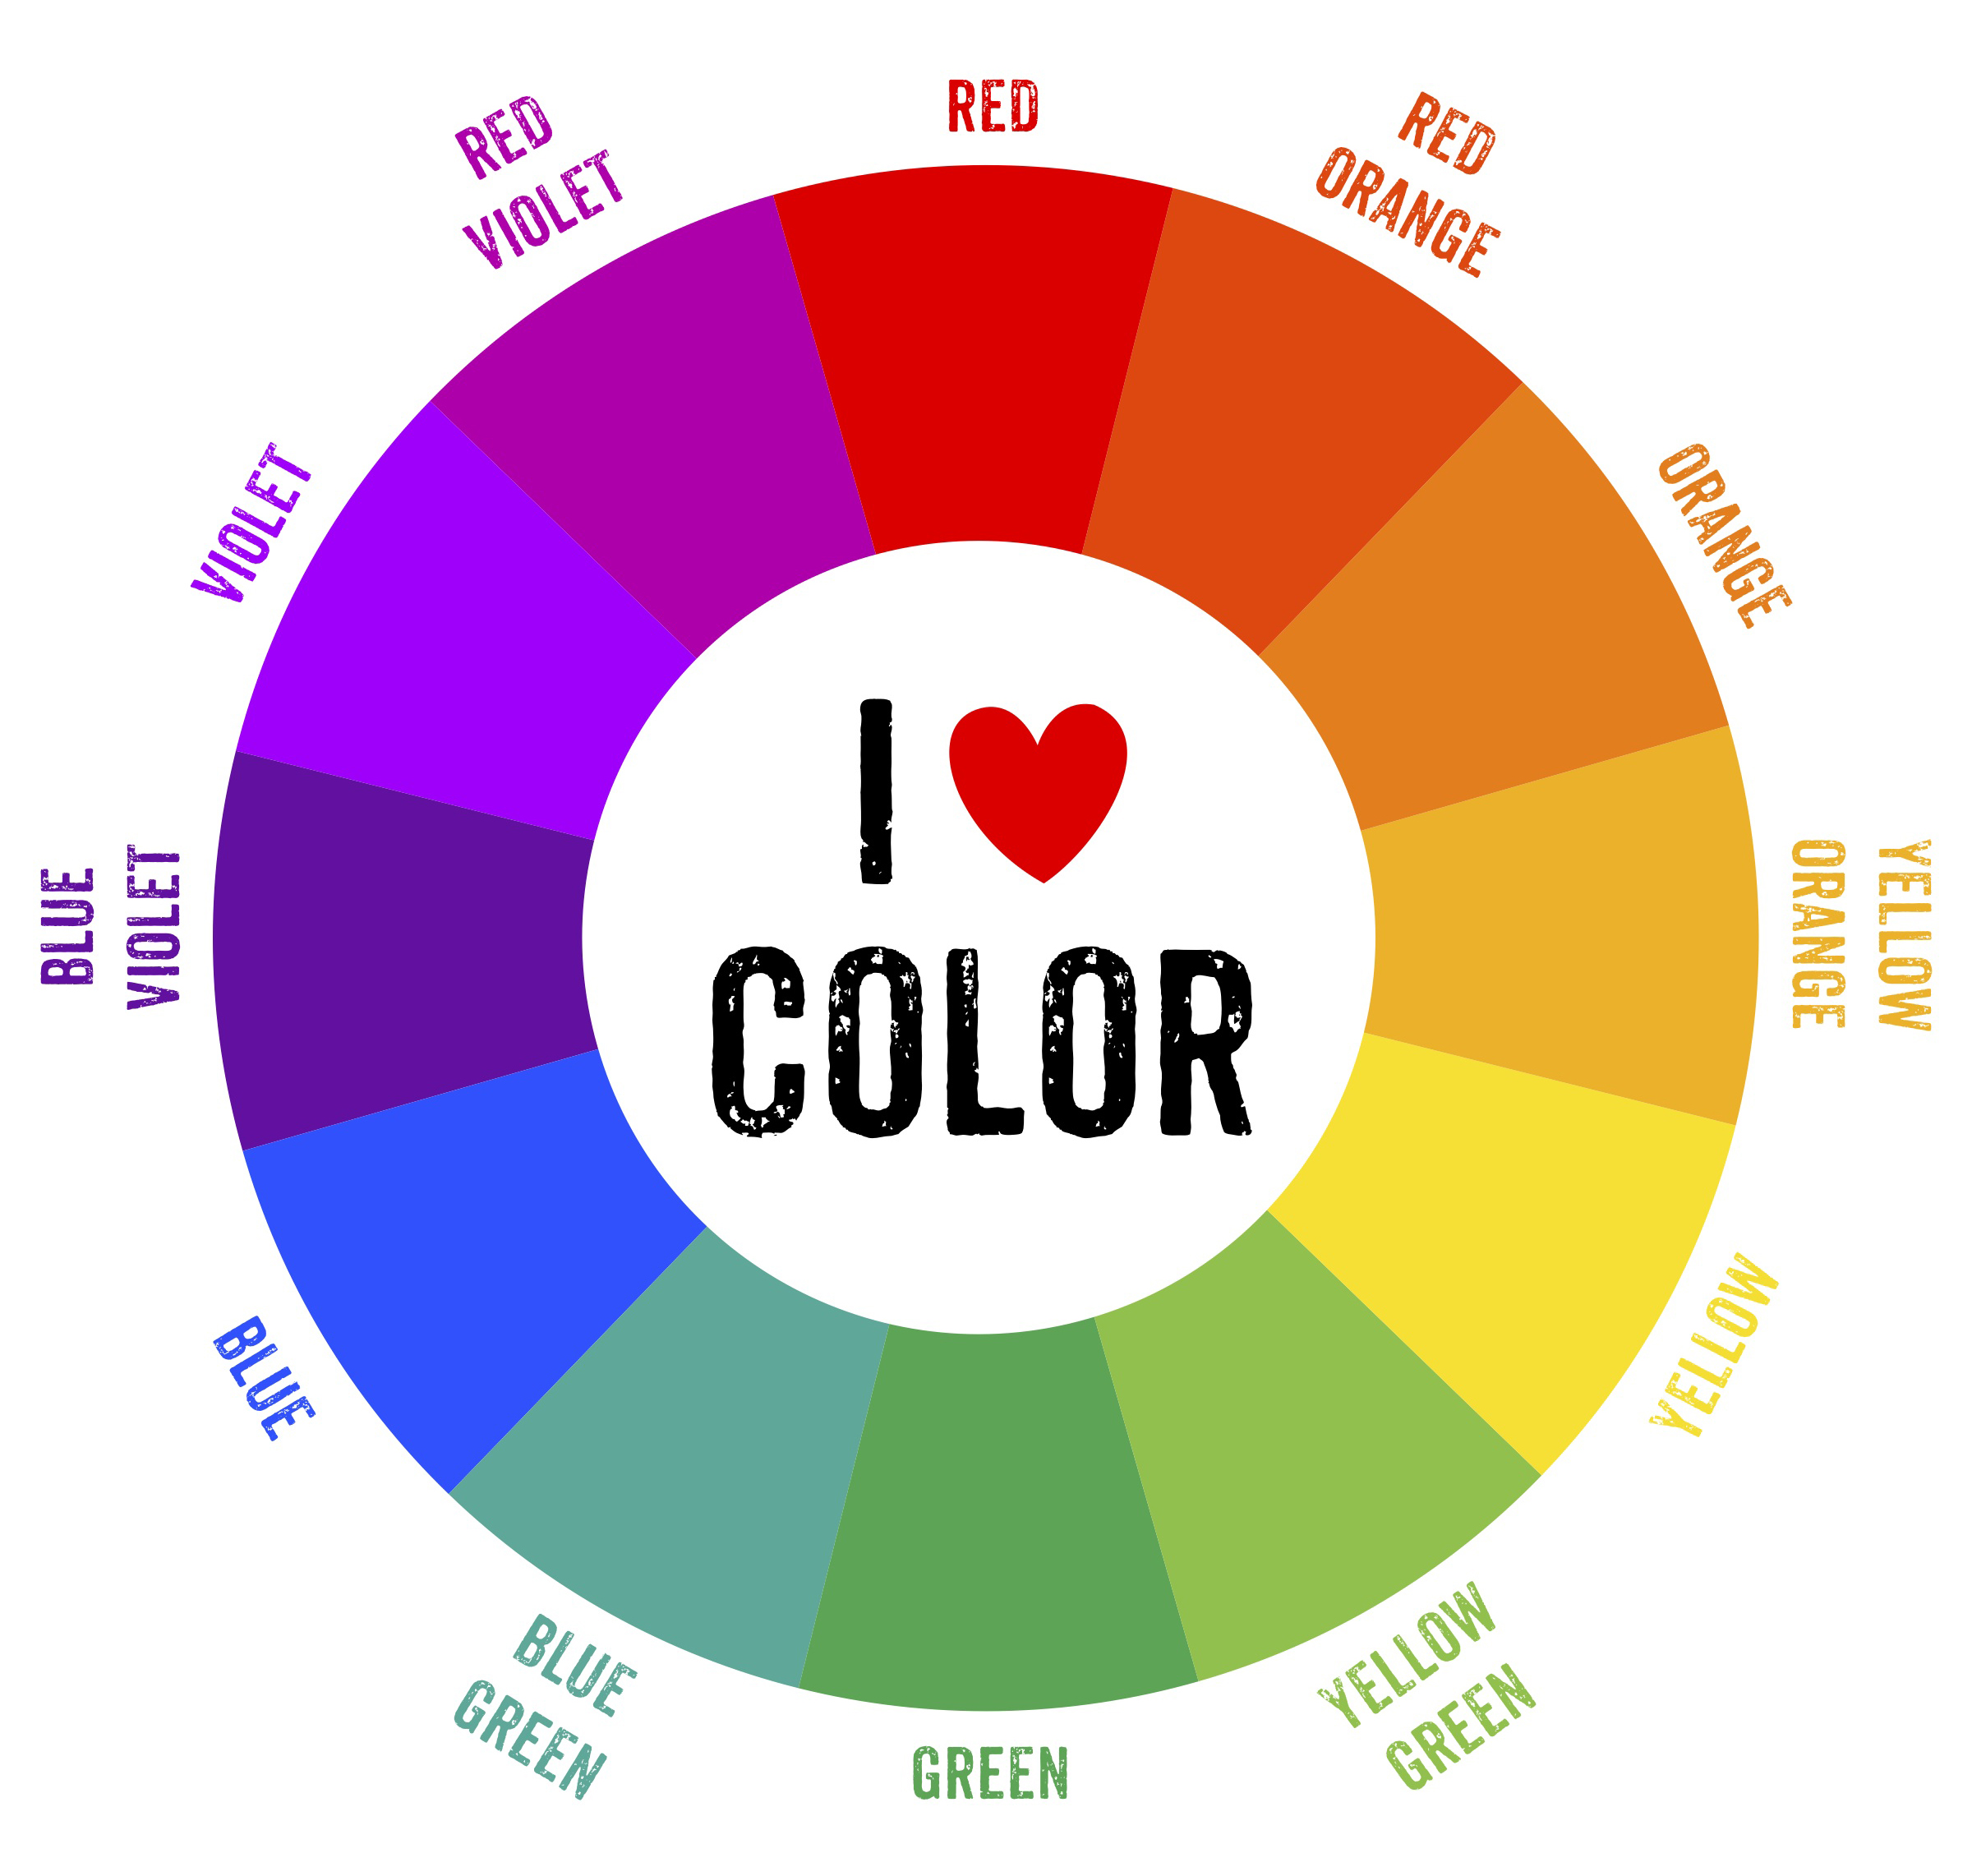 tertiary-color-wheel-filled-in